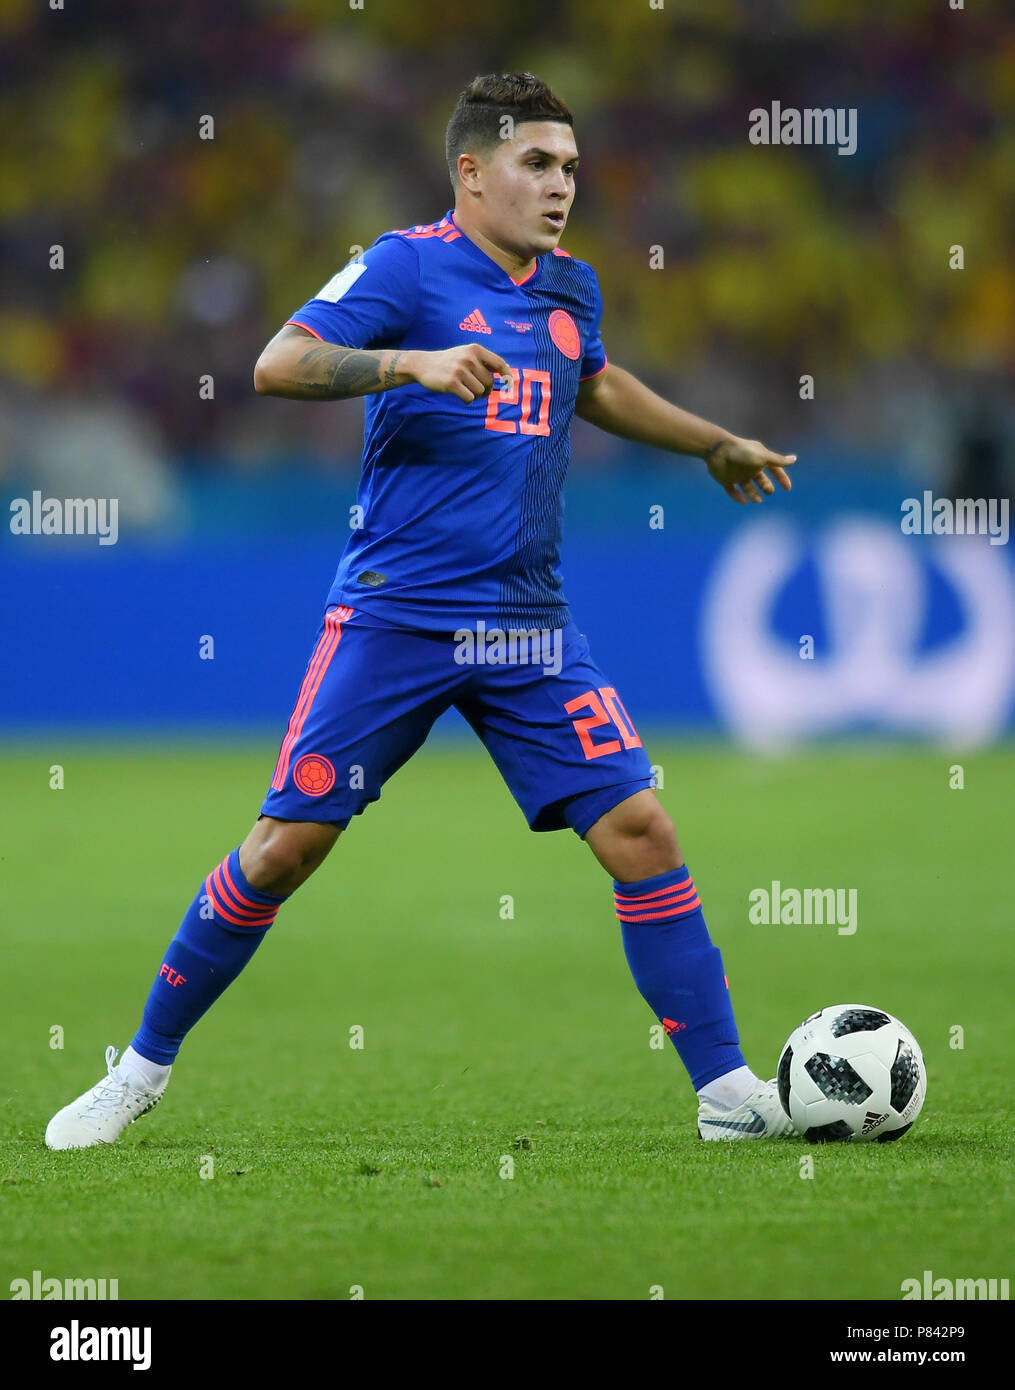 KAZAN, RUSSIA - JUNE 24: Juan Quintero of Colombia in action during the 2018 FIFA World Cup Russia group H match between Poland and Colombia at Kazan Arena on June 24, 2018 in Kazan, Russia. (Photo by Lukasz Laskowski/PressFocus/MB Media) Stock Photo